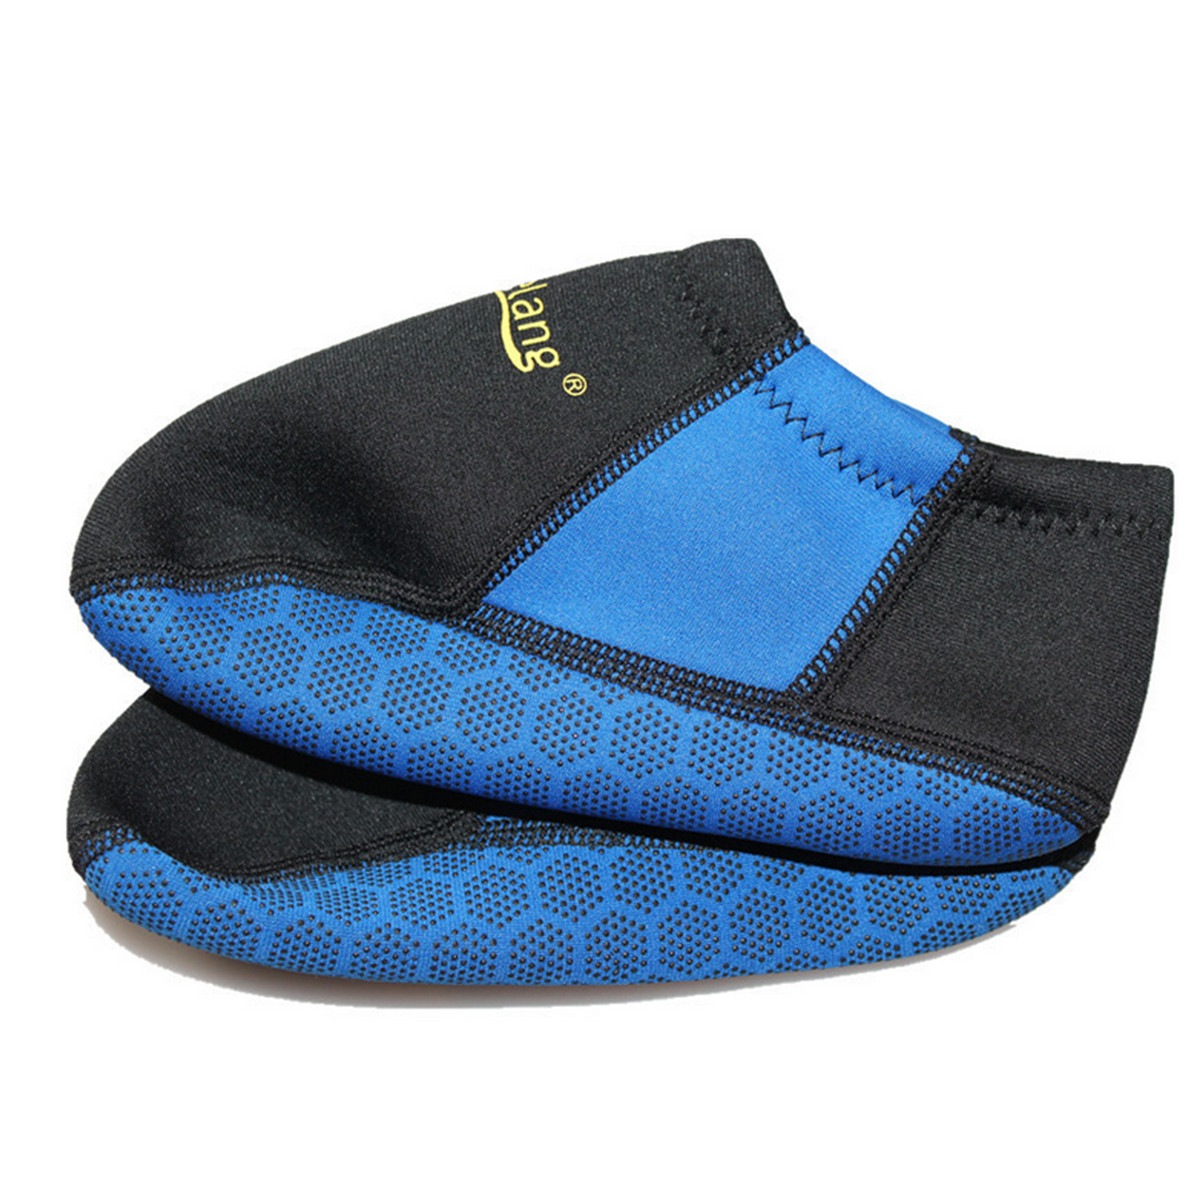 Outdoor-Swimming-Snorkel-Socks-Soft-Beach-Shoes-Water-Sport-Scuba-Surf-Diving-1130872-9